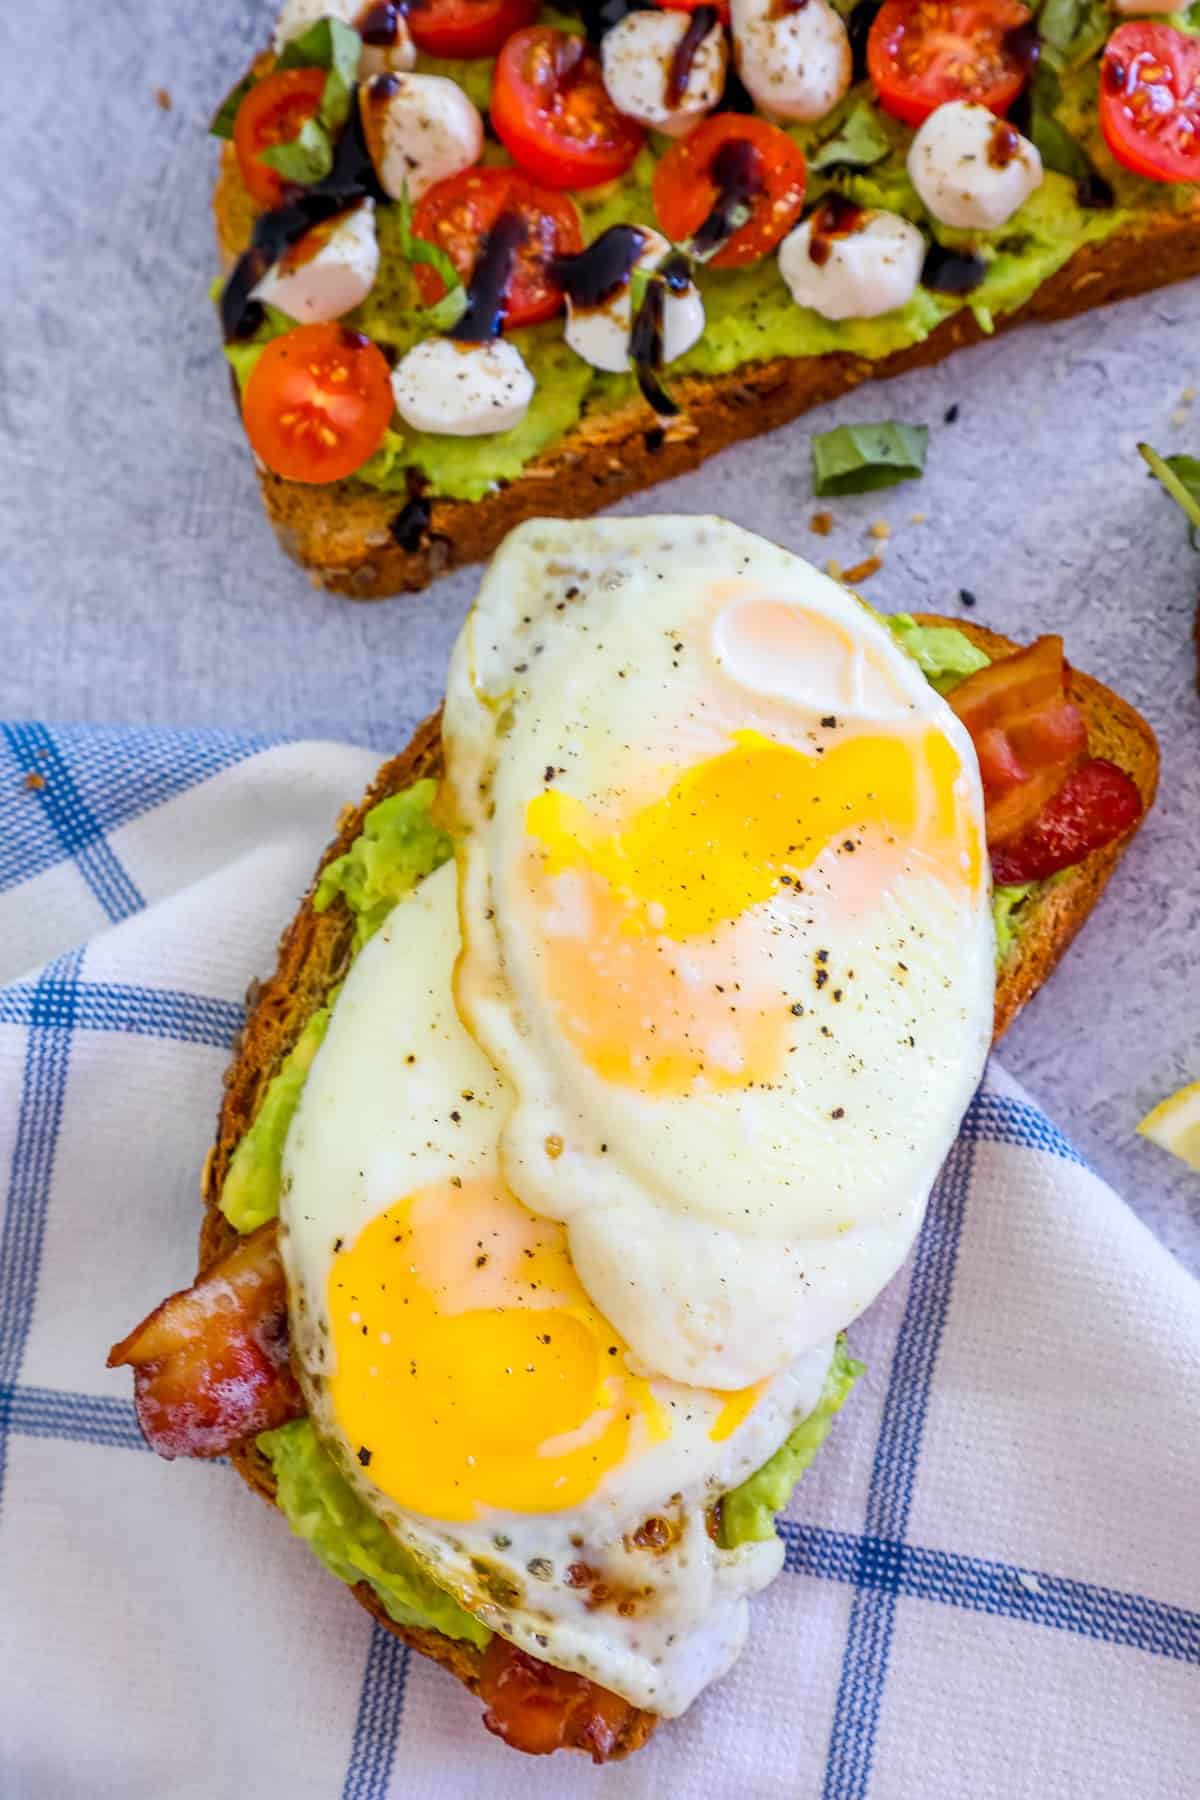 A toast with eggs, tomatoes and avocado on it.